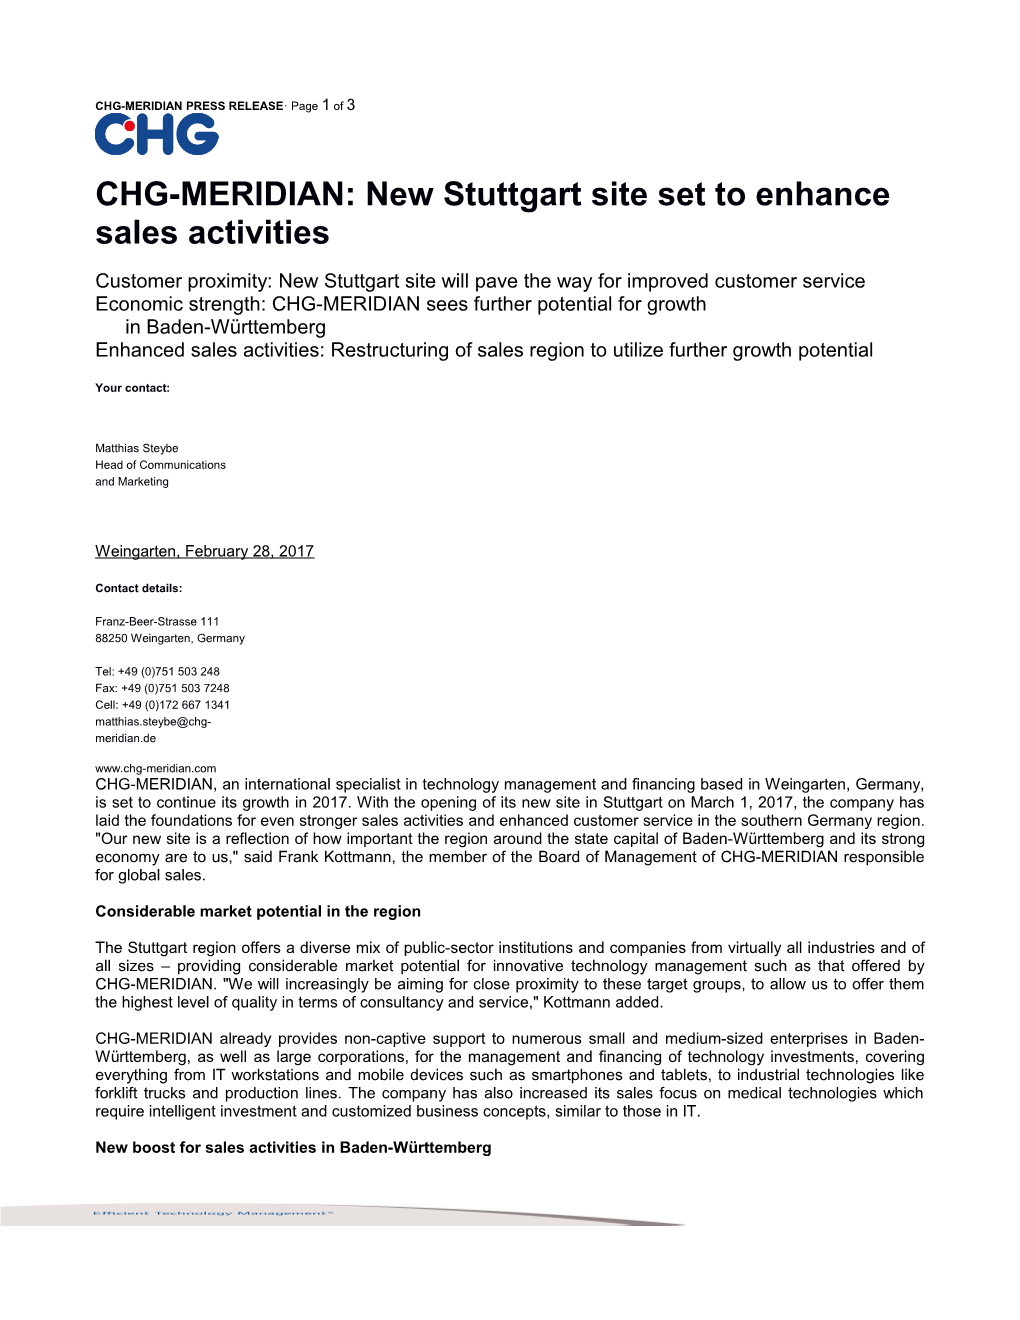 Economic Strength: CHG-MERIDIAN Sees Further Potential for Growth